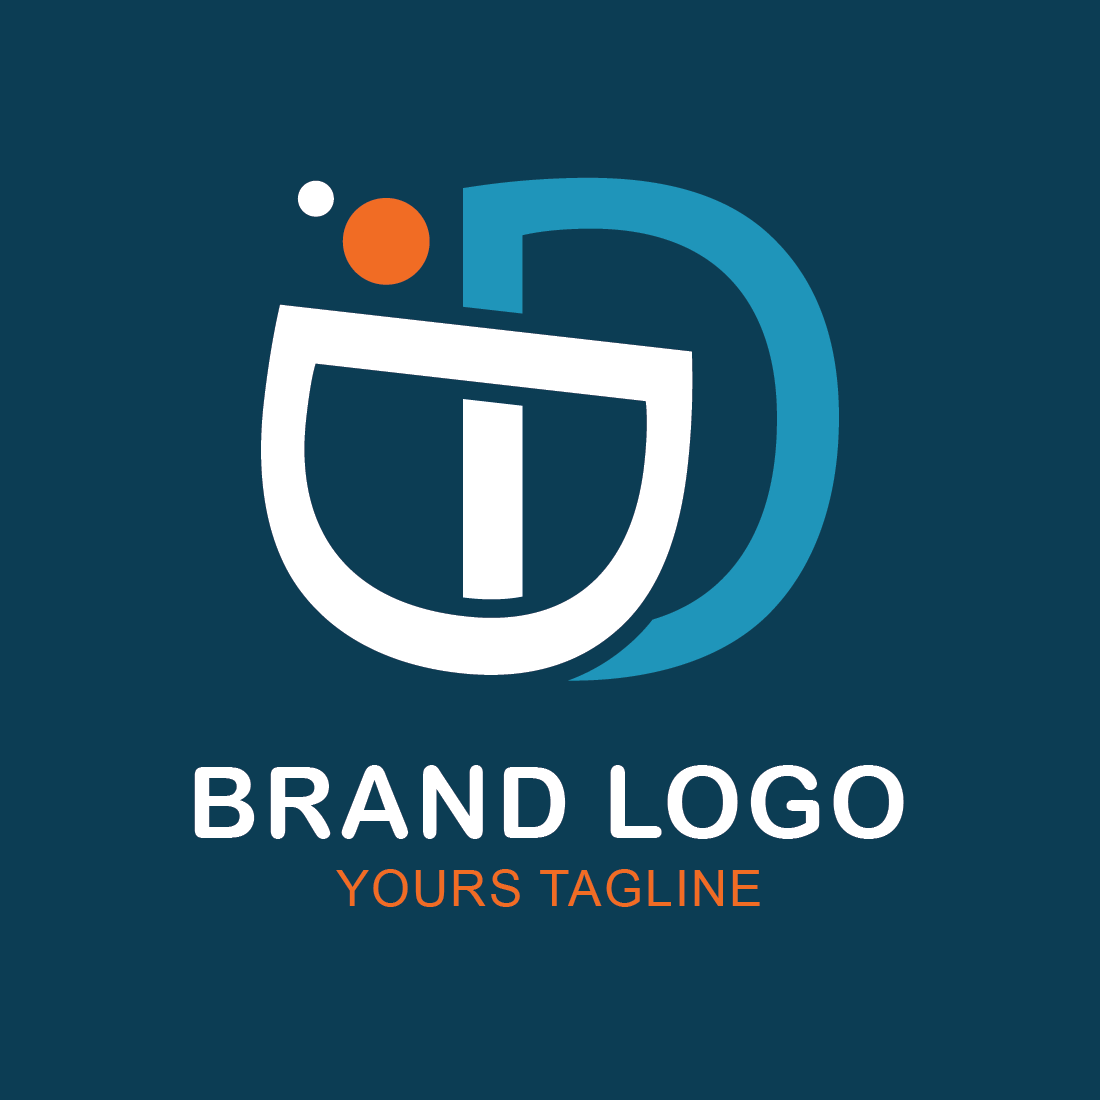 new and unique brand logo design || d letter logo design for your company, brand and businesses preview image.